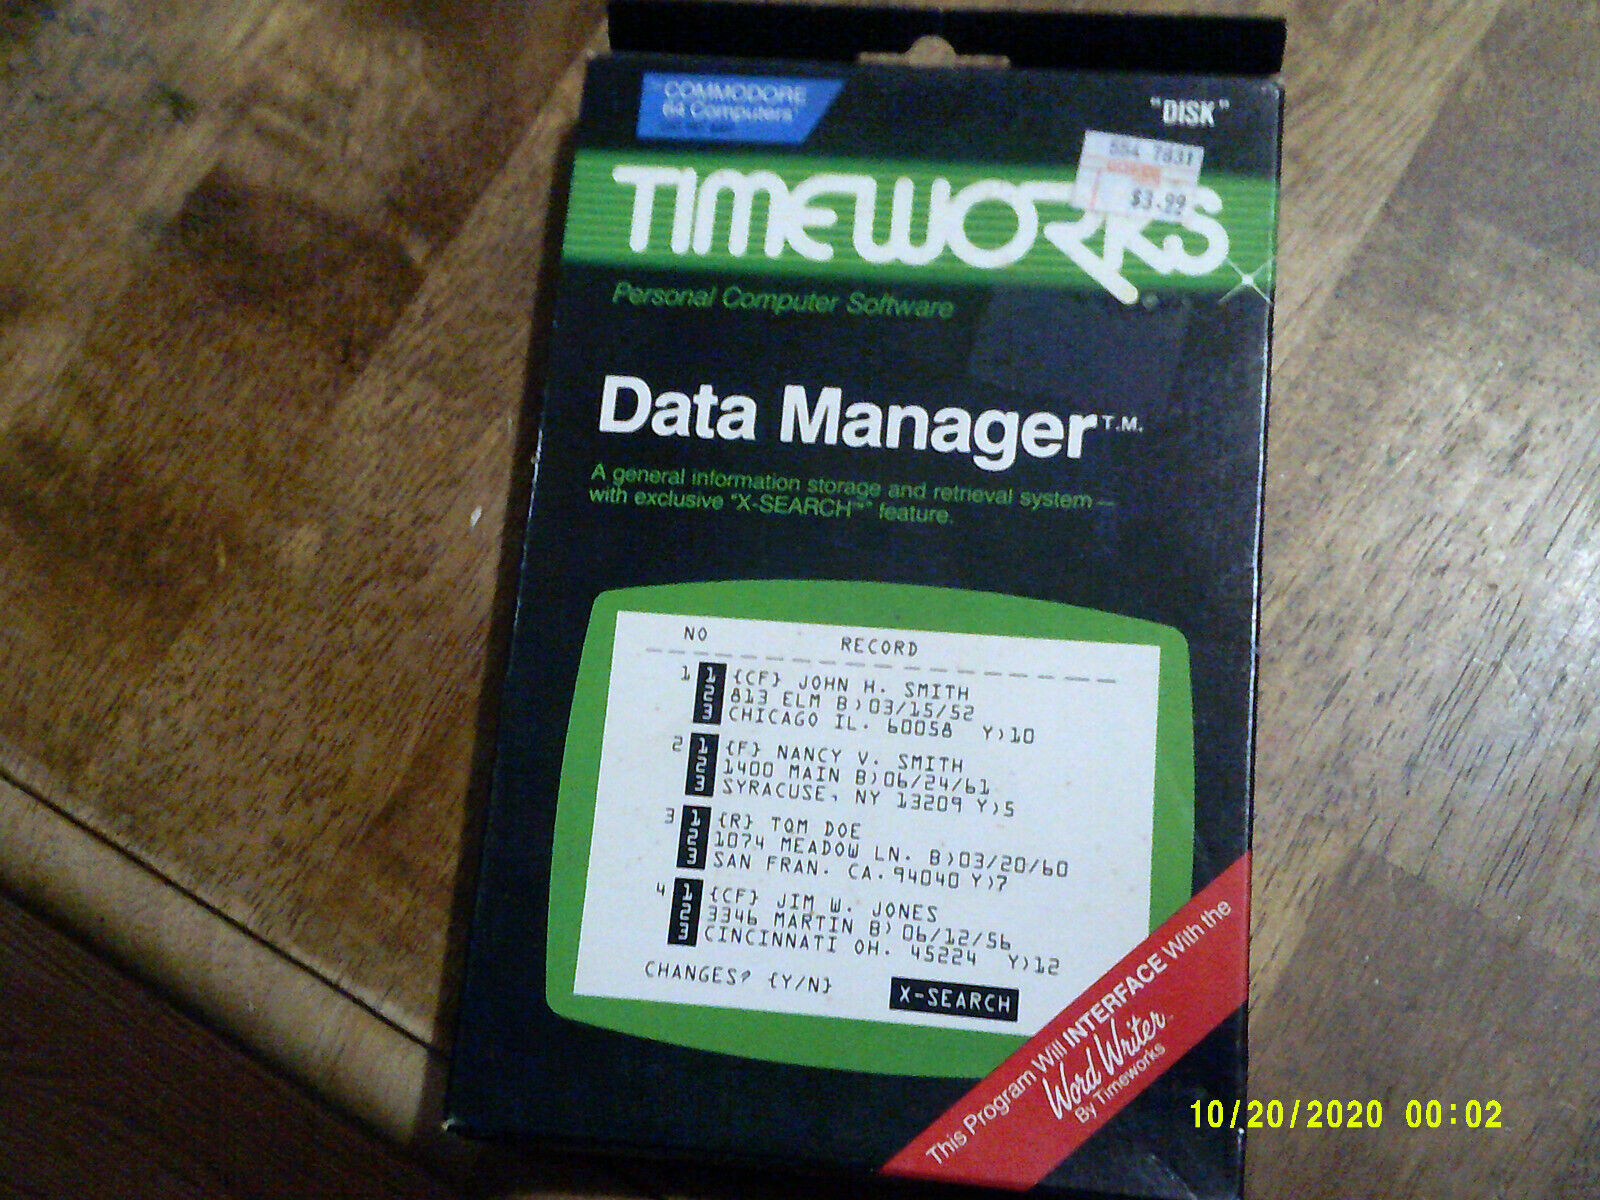 Commodore 64 Timeworks Data Manager  Computer Software 5.25” Floppy Disk